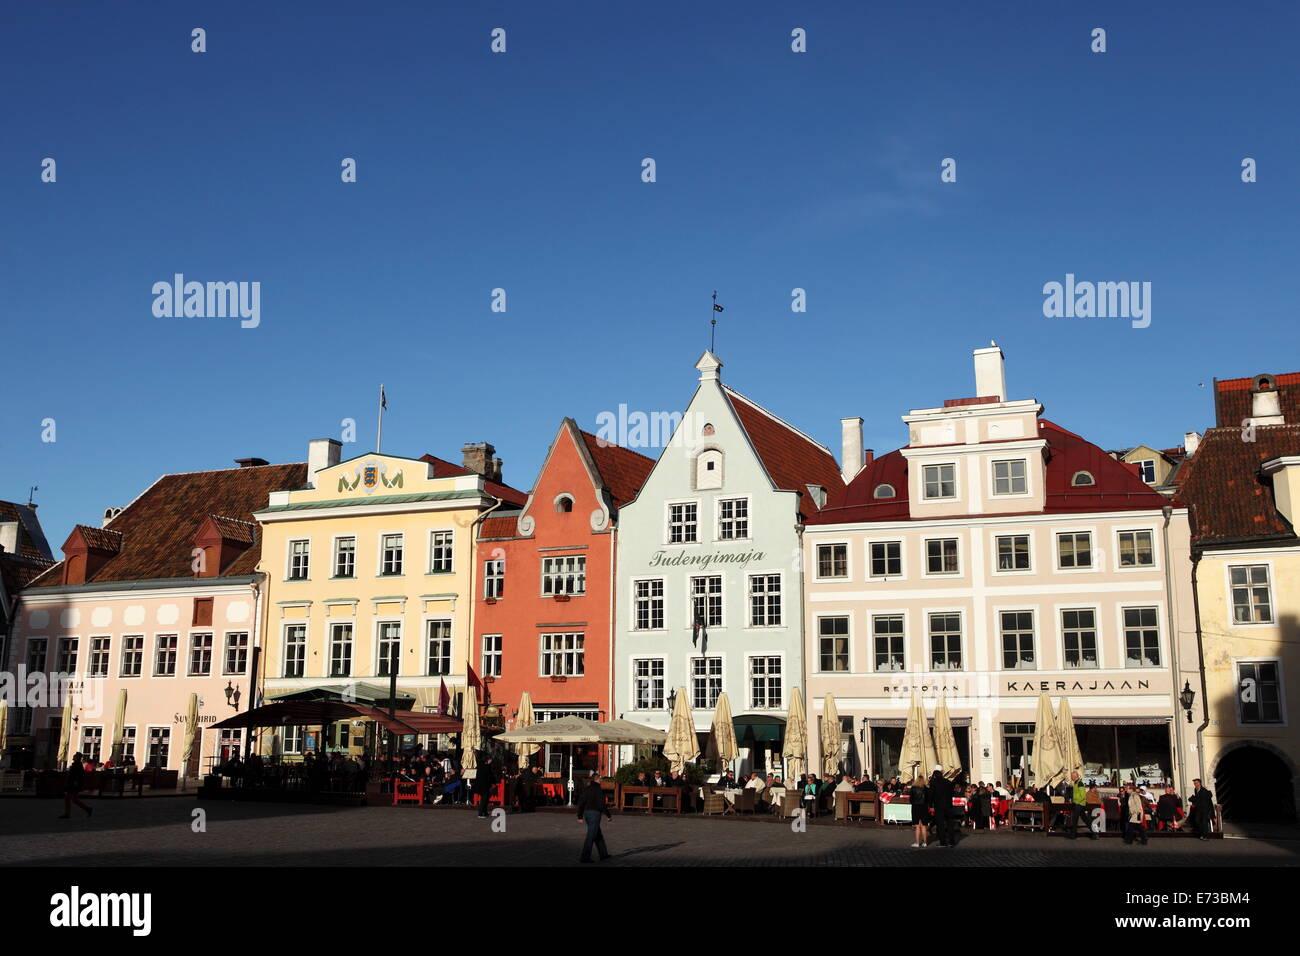 Town Hall Square, surrounded by grand, historic buildings, many now used as bars and cafes, in Tallinn, Estonia, Europe Stock Photo